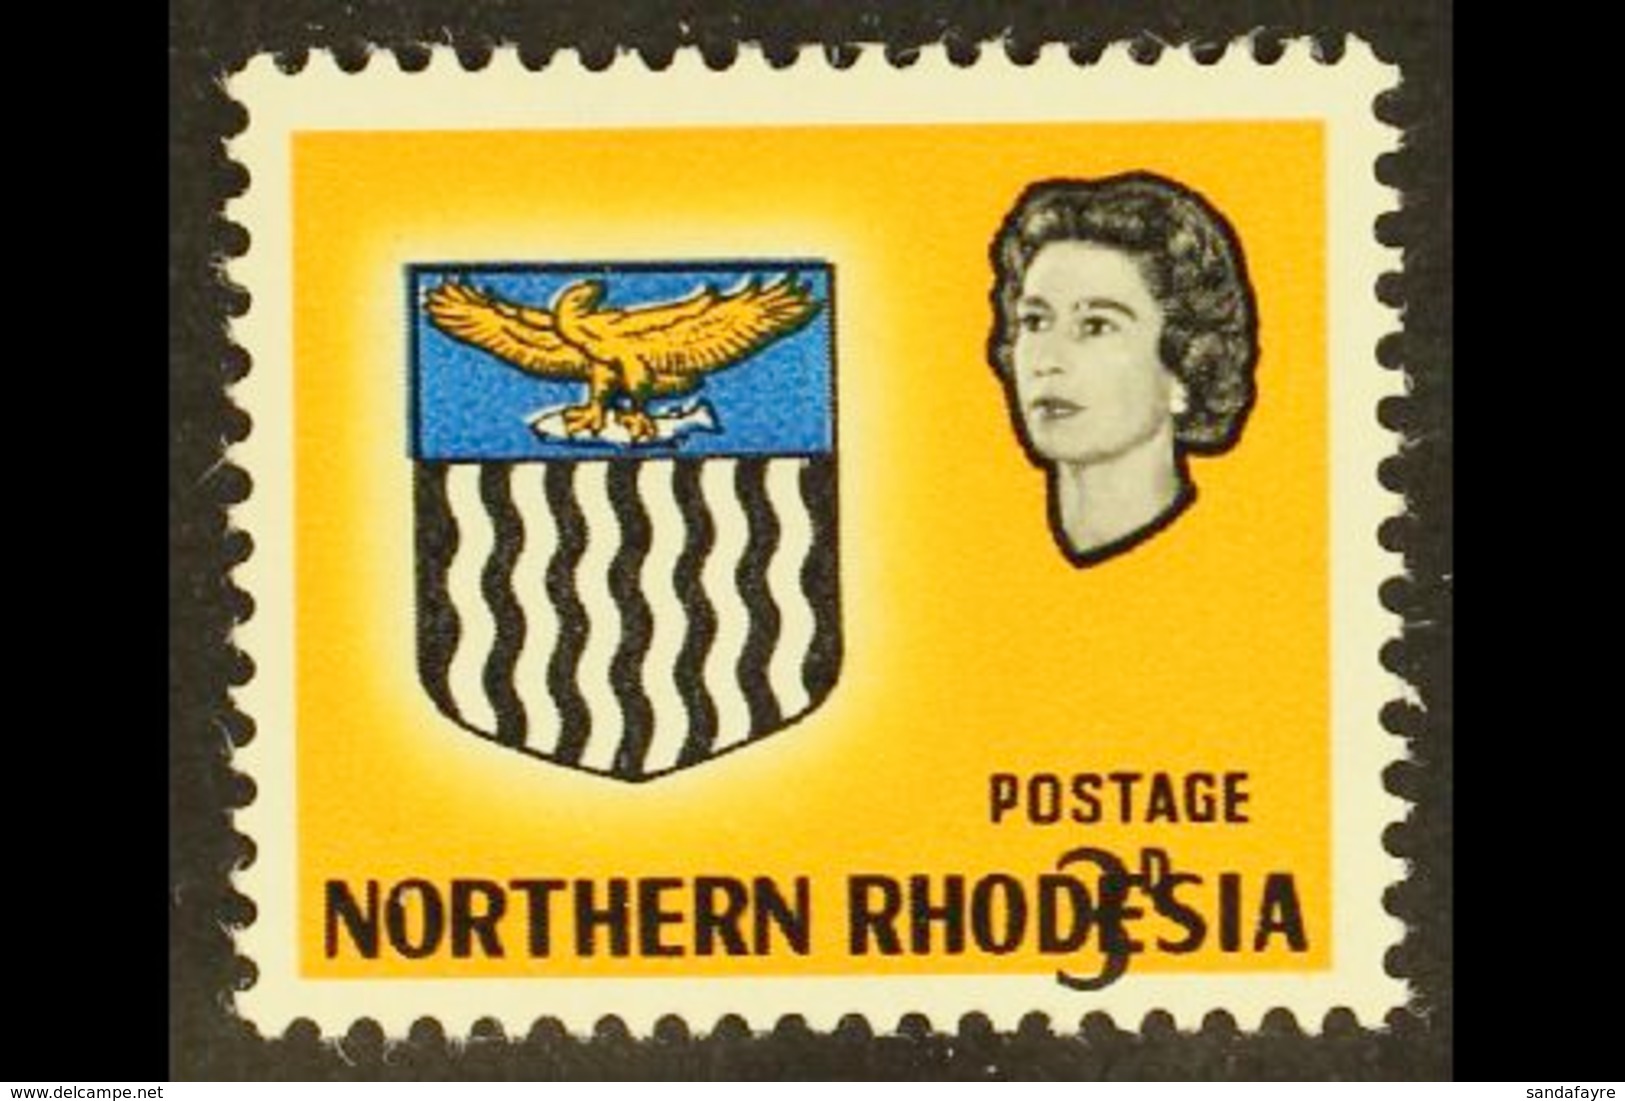 1963 3d Arms Definitive With Huge Shift Of Value, Into "RHODESIA" At Base Of Stamp, SG 78, Mint, Light Gum Crease. Strik - Northern Rhodesia (...-1963)